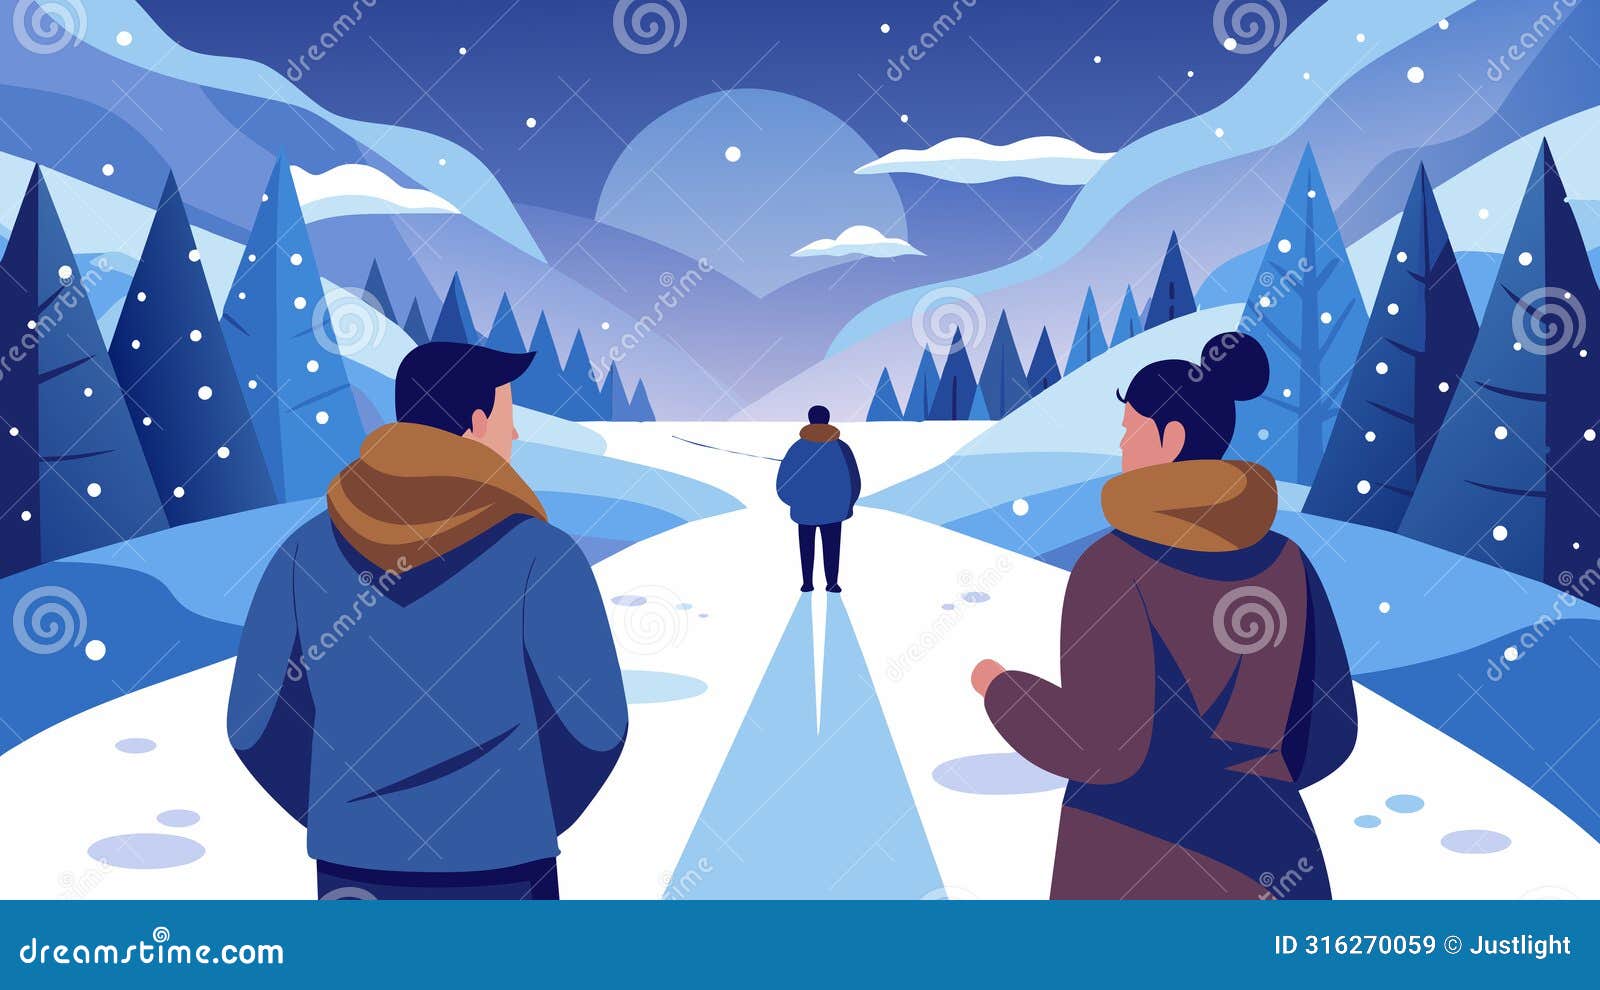 two strangers meet on a snowy path and end up pouring out their life stories to each other in the peacefulness of the